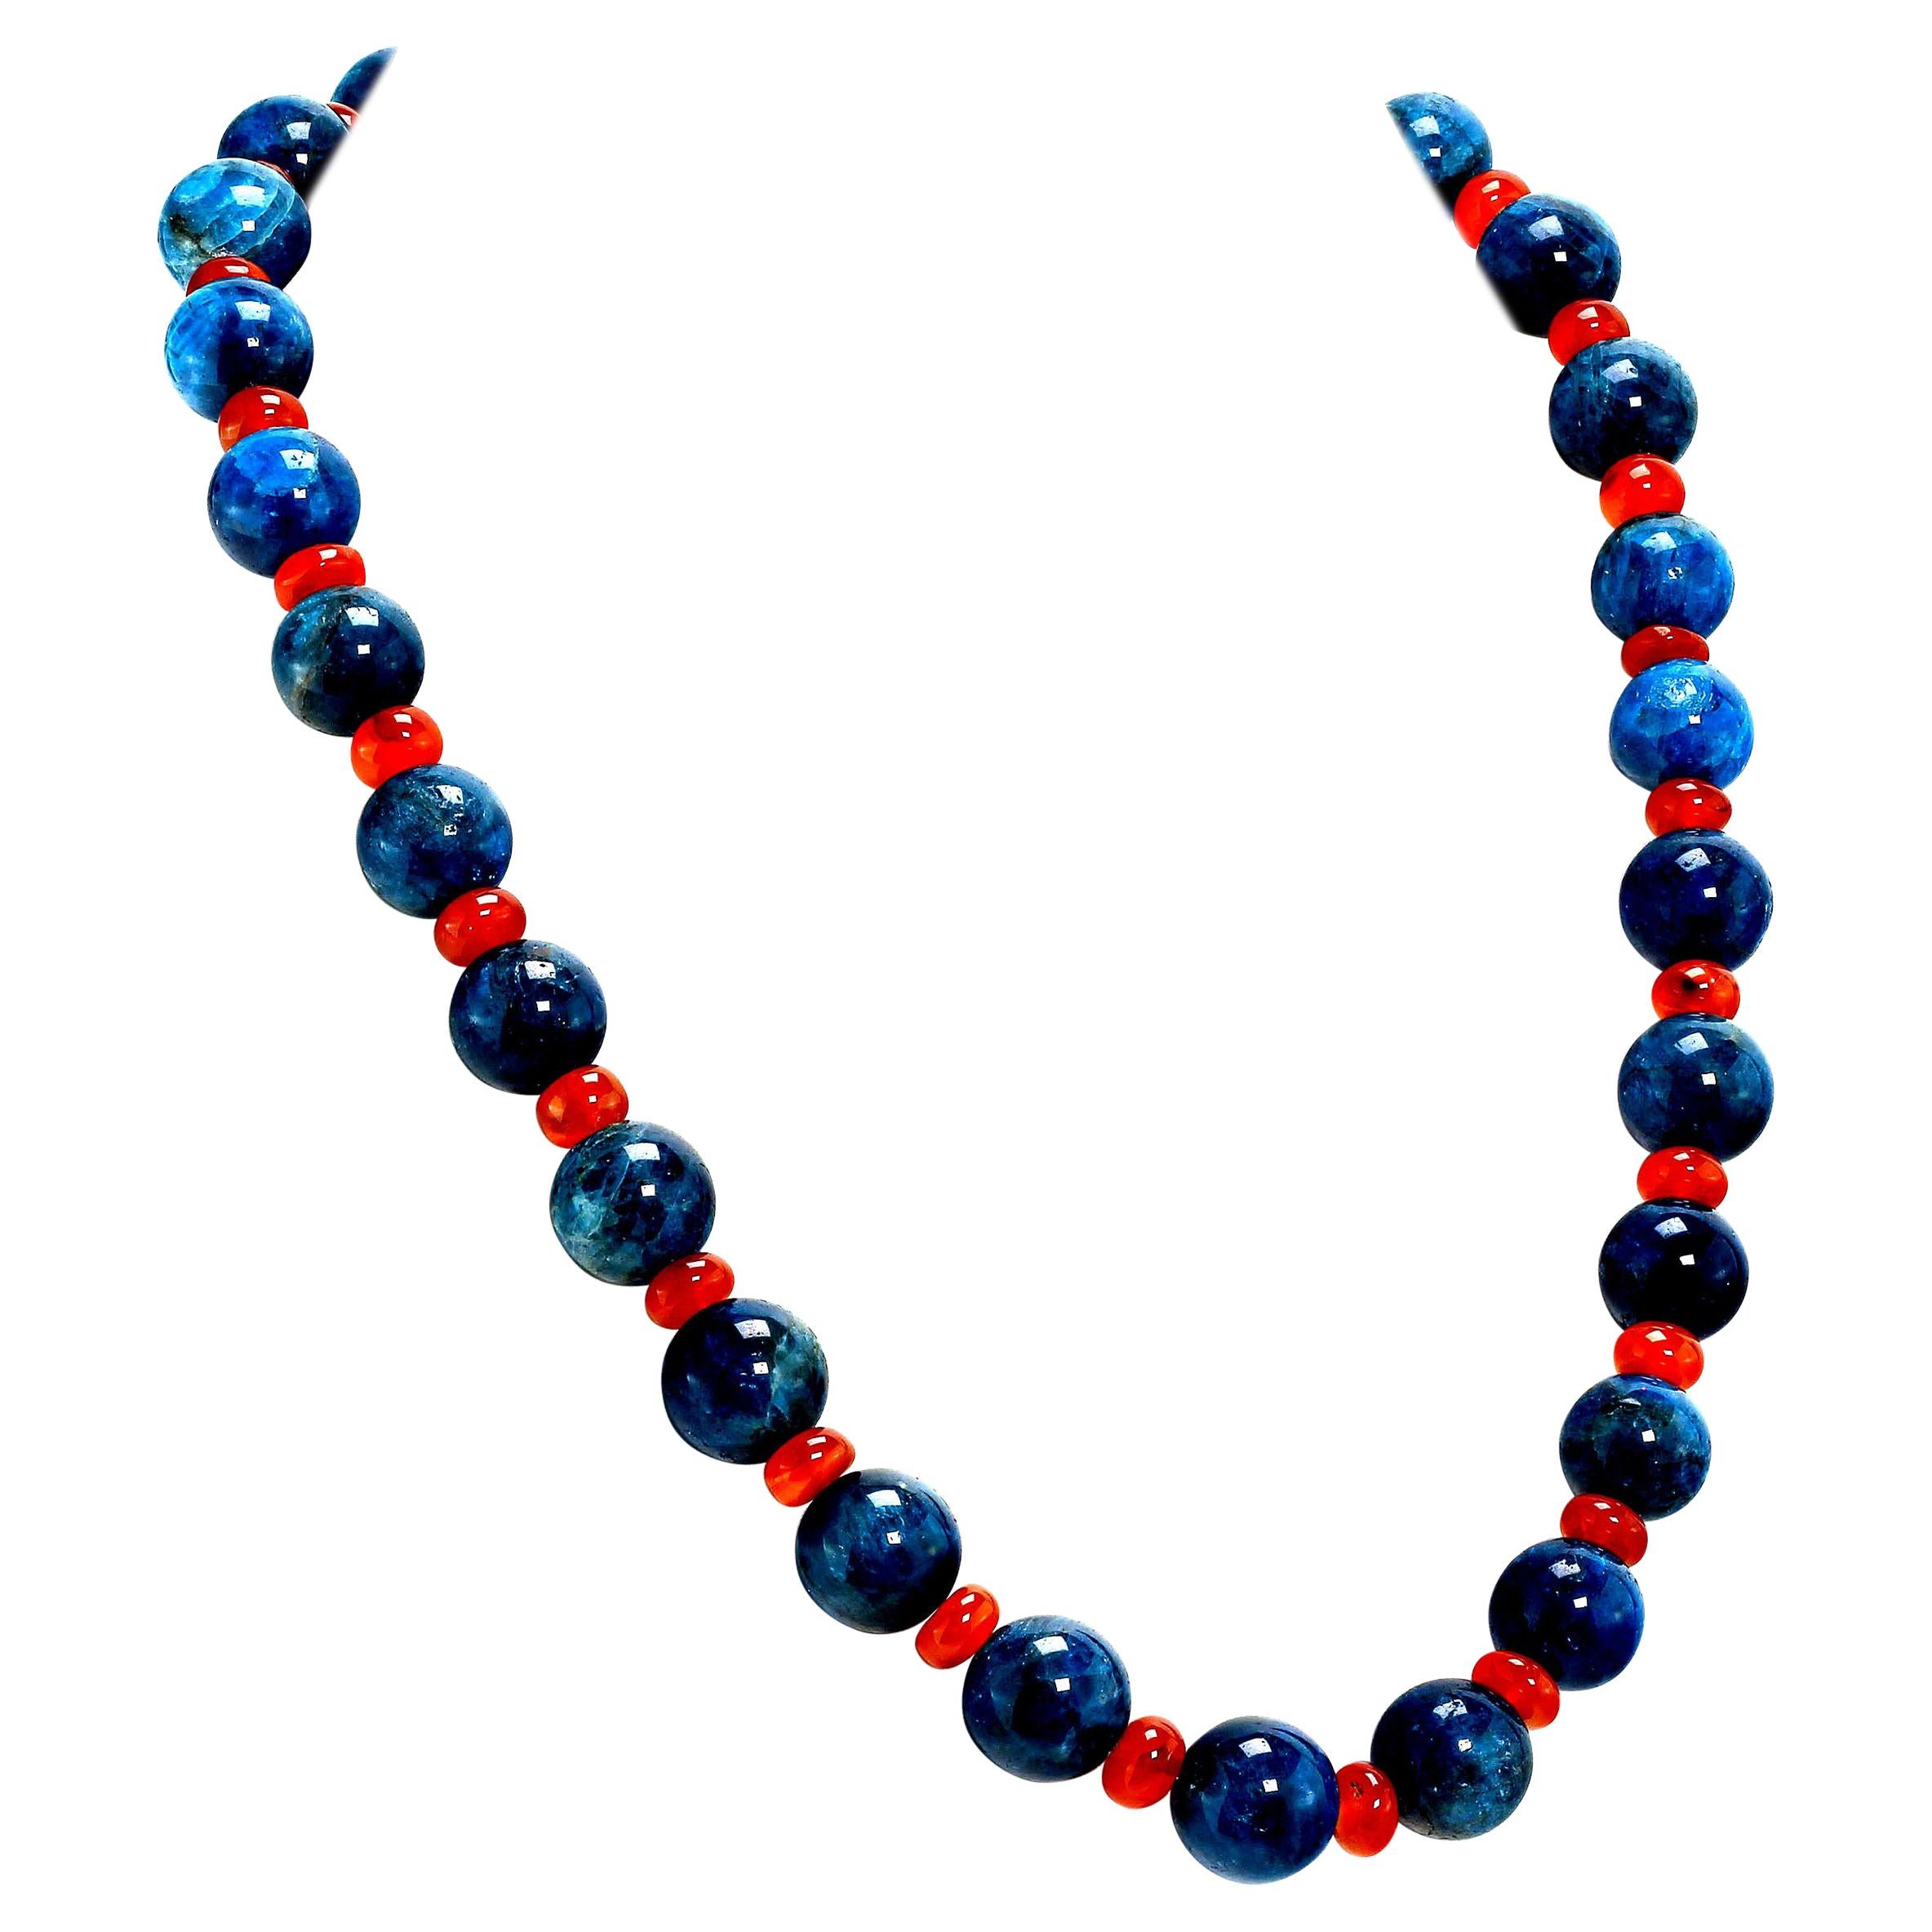 23 Inch Necklace of Teal Apatite Beads (15mm) that have interesting variations in intensity of color and veining.  The highly polished Apatite Beads alternate with Glowing Translucent Carnelian Rondelles (9mm).  The combination is more than the sum